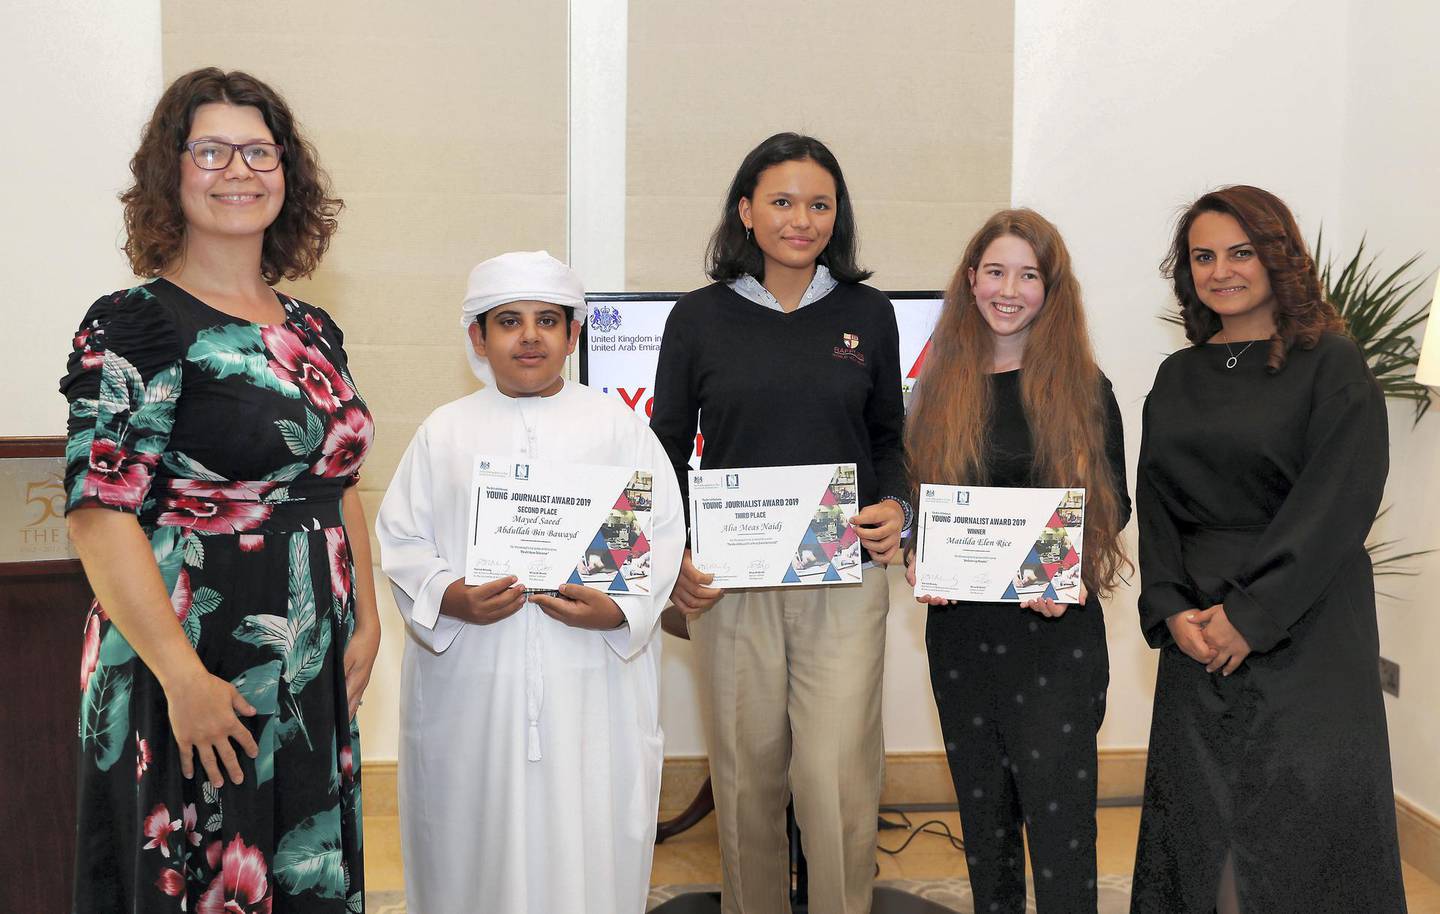 ABU DHABI , UNITED ARAB EMIRATES , Nov 18 – 2019 :- Left to Right - Sophia Brecknell, Deputy British Ambassador,  Mayed Saeed Abdullah Bin Bawayd (2nd winner), Alia Meas Naidj (3rd winner),  Matilda Elen Rice (1st winner) and Mina Al Oraibi , Editor in Chief, The National during the award ceremony of the British Embassy Young Journalist Award 2019 held at the residence of British Ambassador on Saadiyat Island in Abu Dhabi. ( Pawan Singh / The National )  For News. Story by Nick March